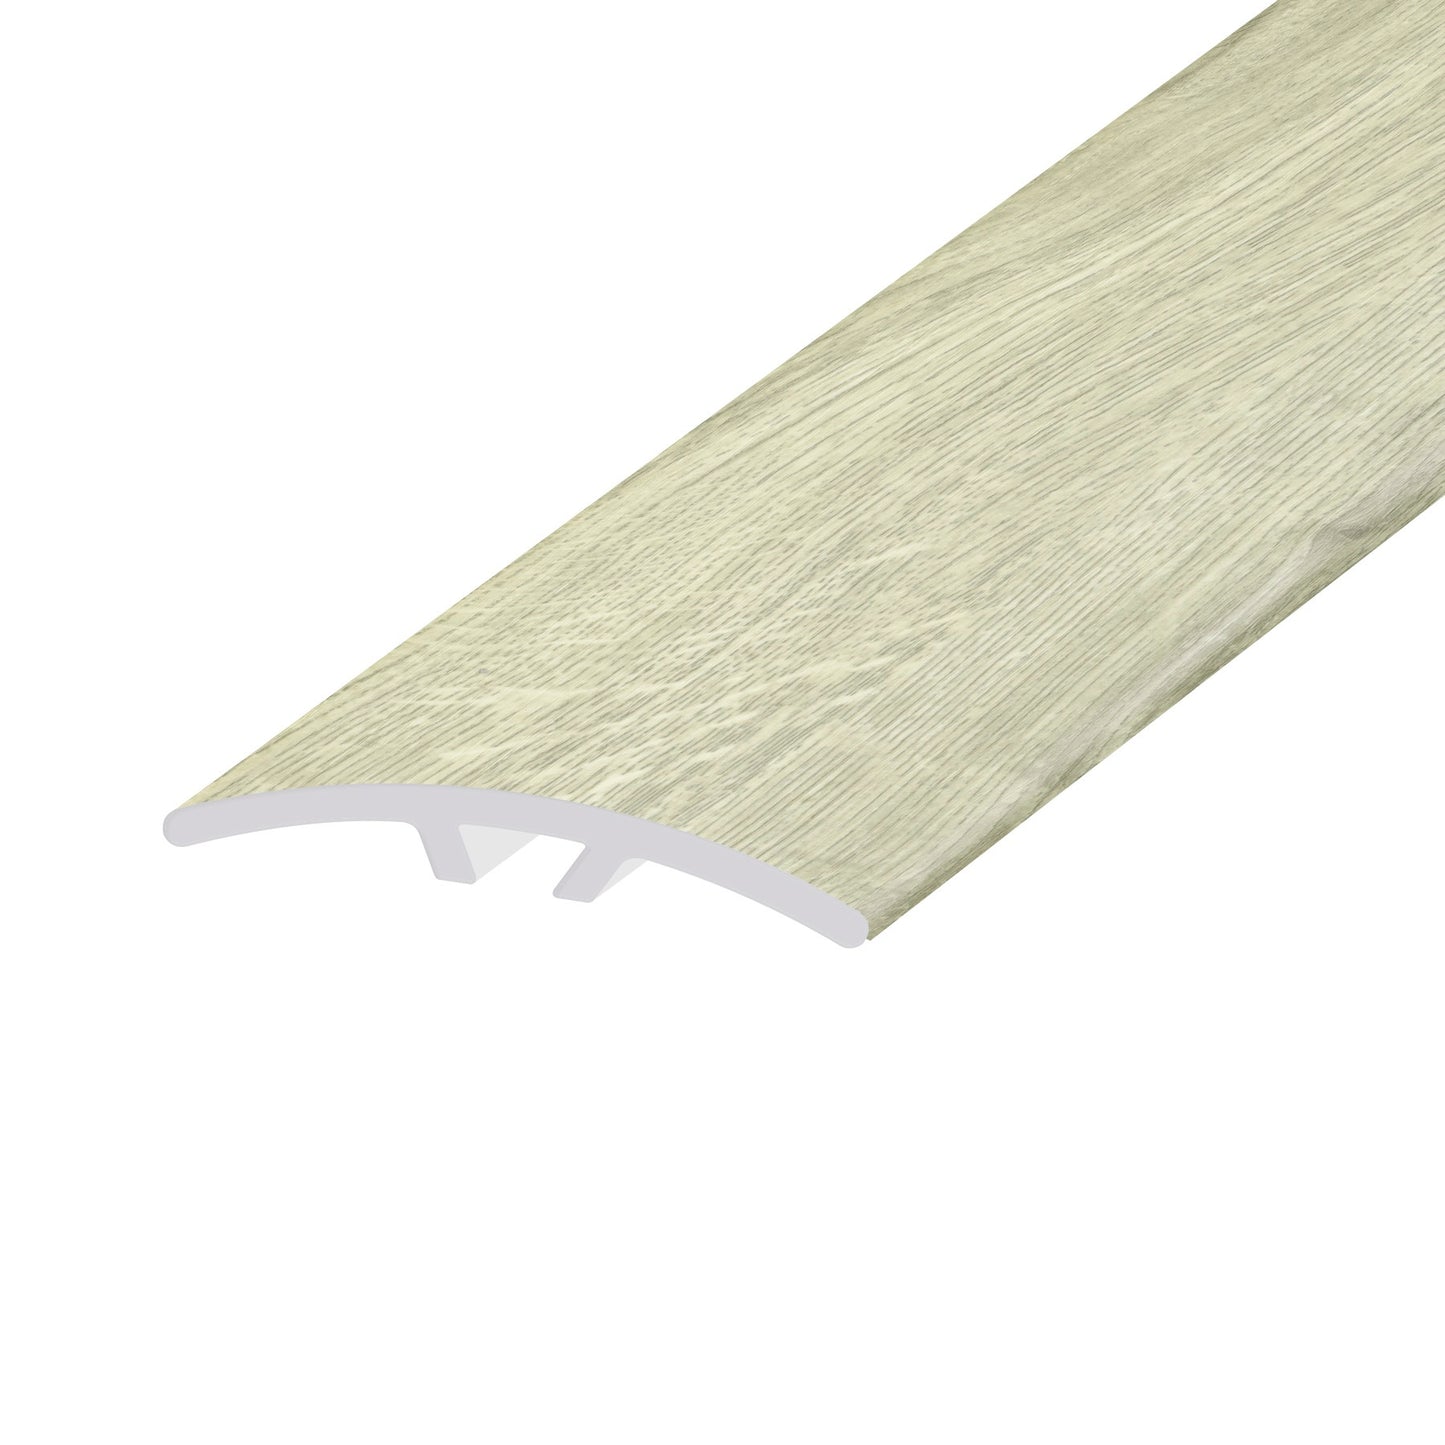 Tahitian Sand 0.23 in. Thich x 1.59 in. Width x 94 in. Length Multi-Purpose Reducer Vinyl Molding